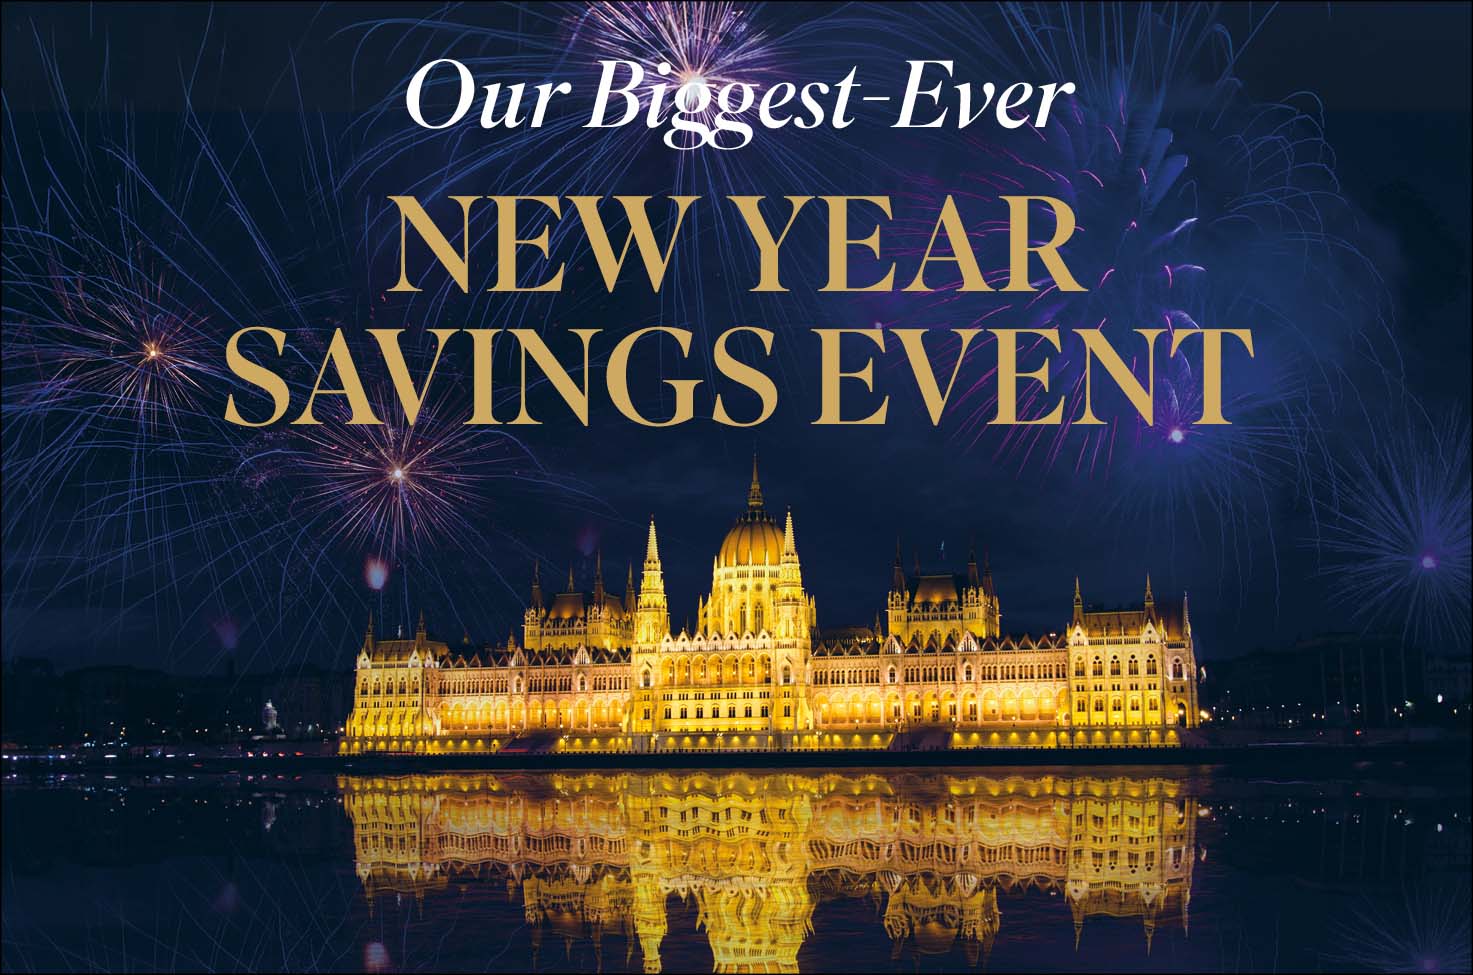 Our Biggest Ever New Year Savings Event with fireworks in front of the Budapest Parliament Building